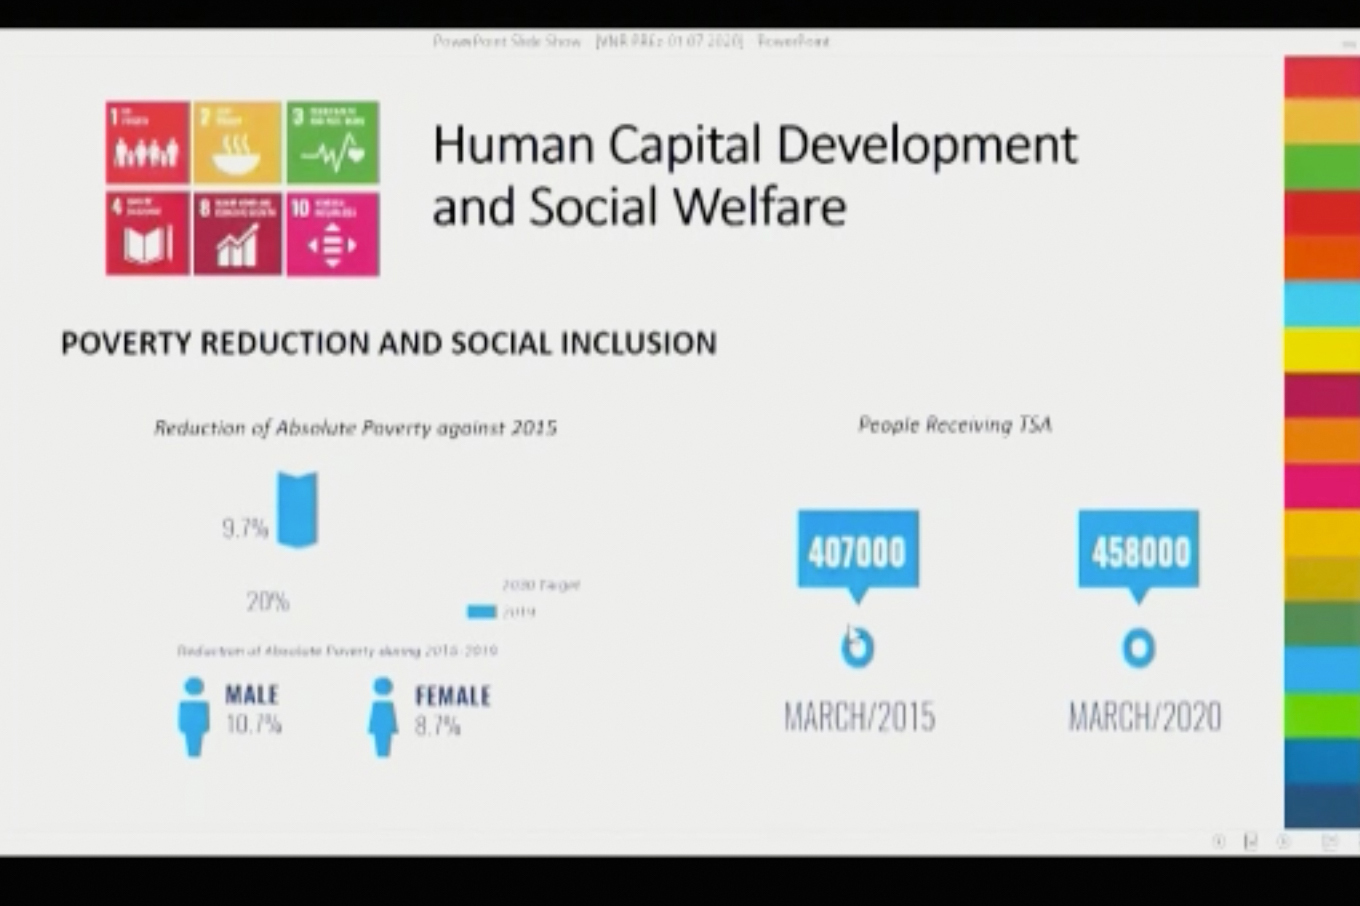 A slide from the VNR presented by Georgia highlights the country's efforts to focus on poverty reduction and social inclusion.